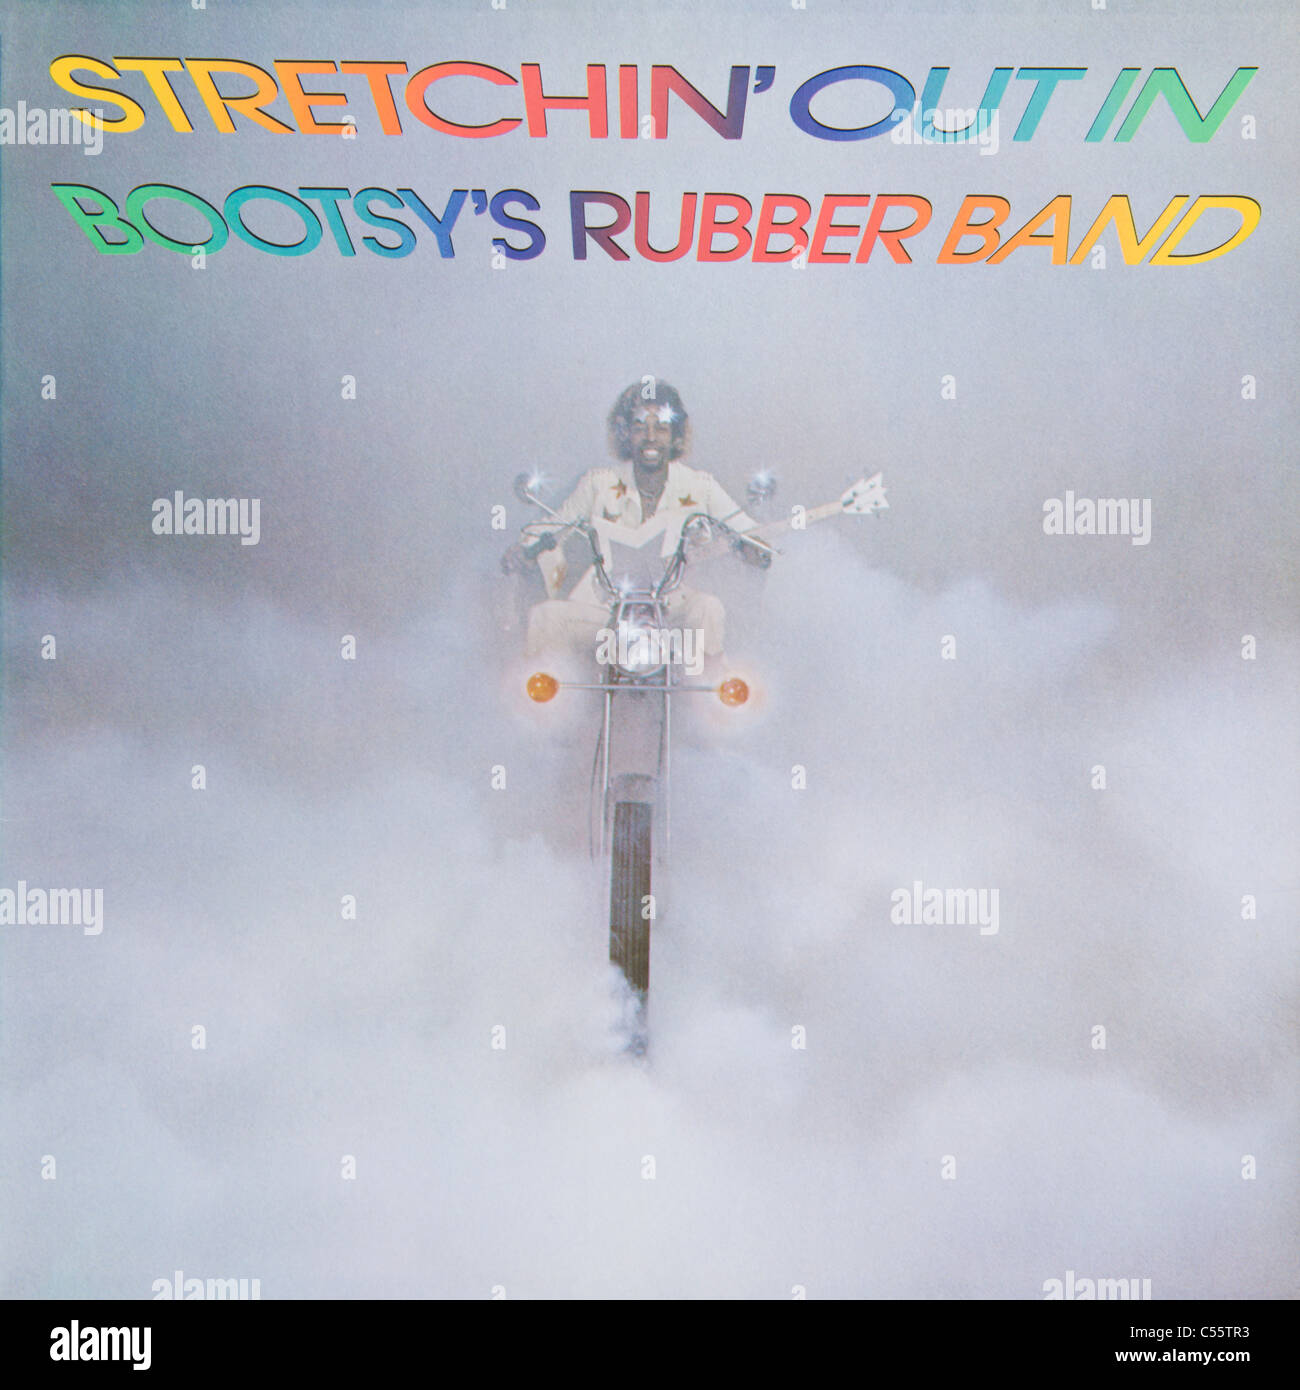 Cover of original vinyl album Stretch' Out In Bootsy's Rubber Band by Bootsy Collins released 1976 on Warner Bros. Records Stock Photo